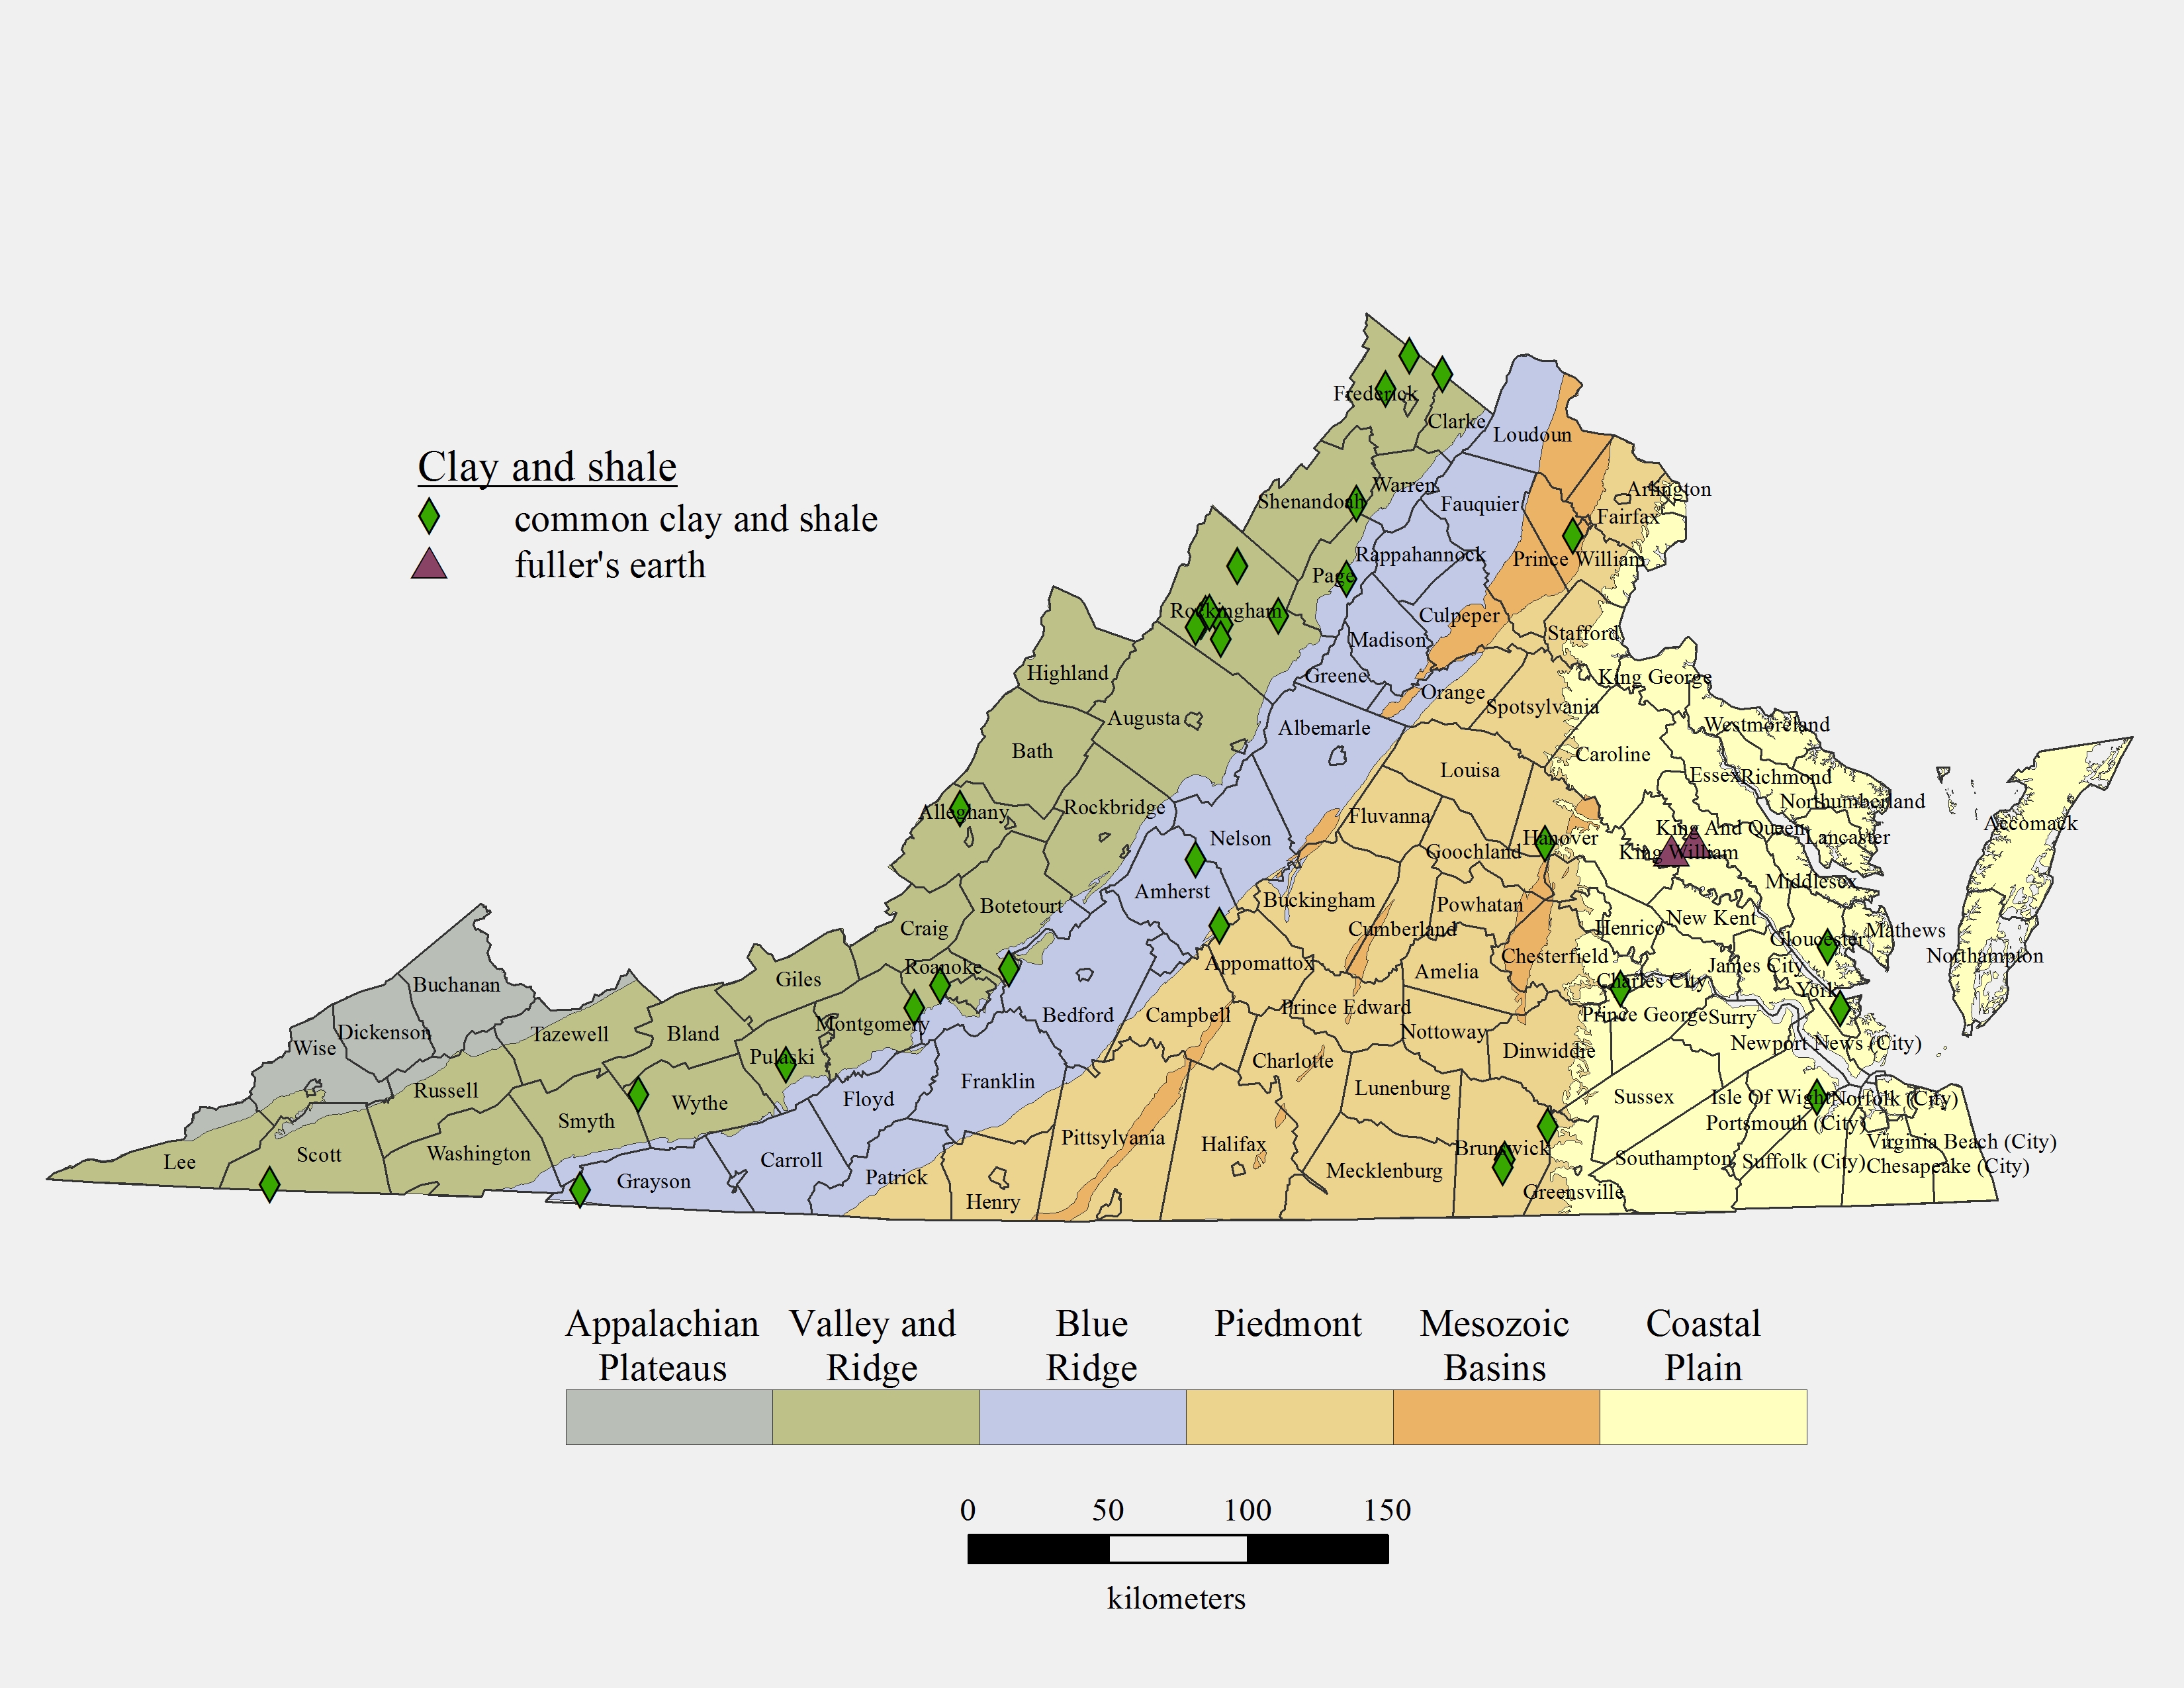 Clay materials extraction sites in Virginia